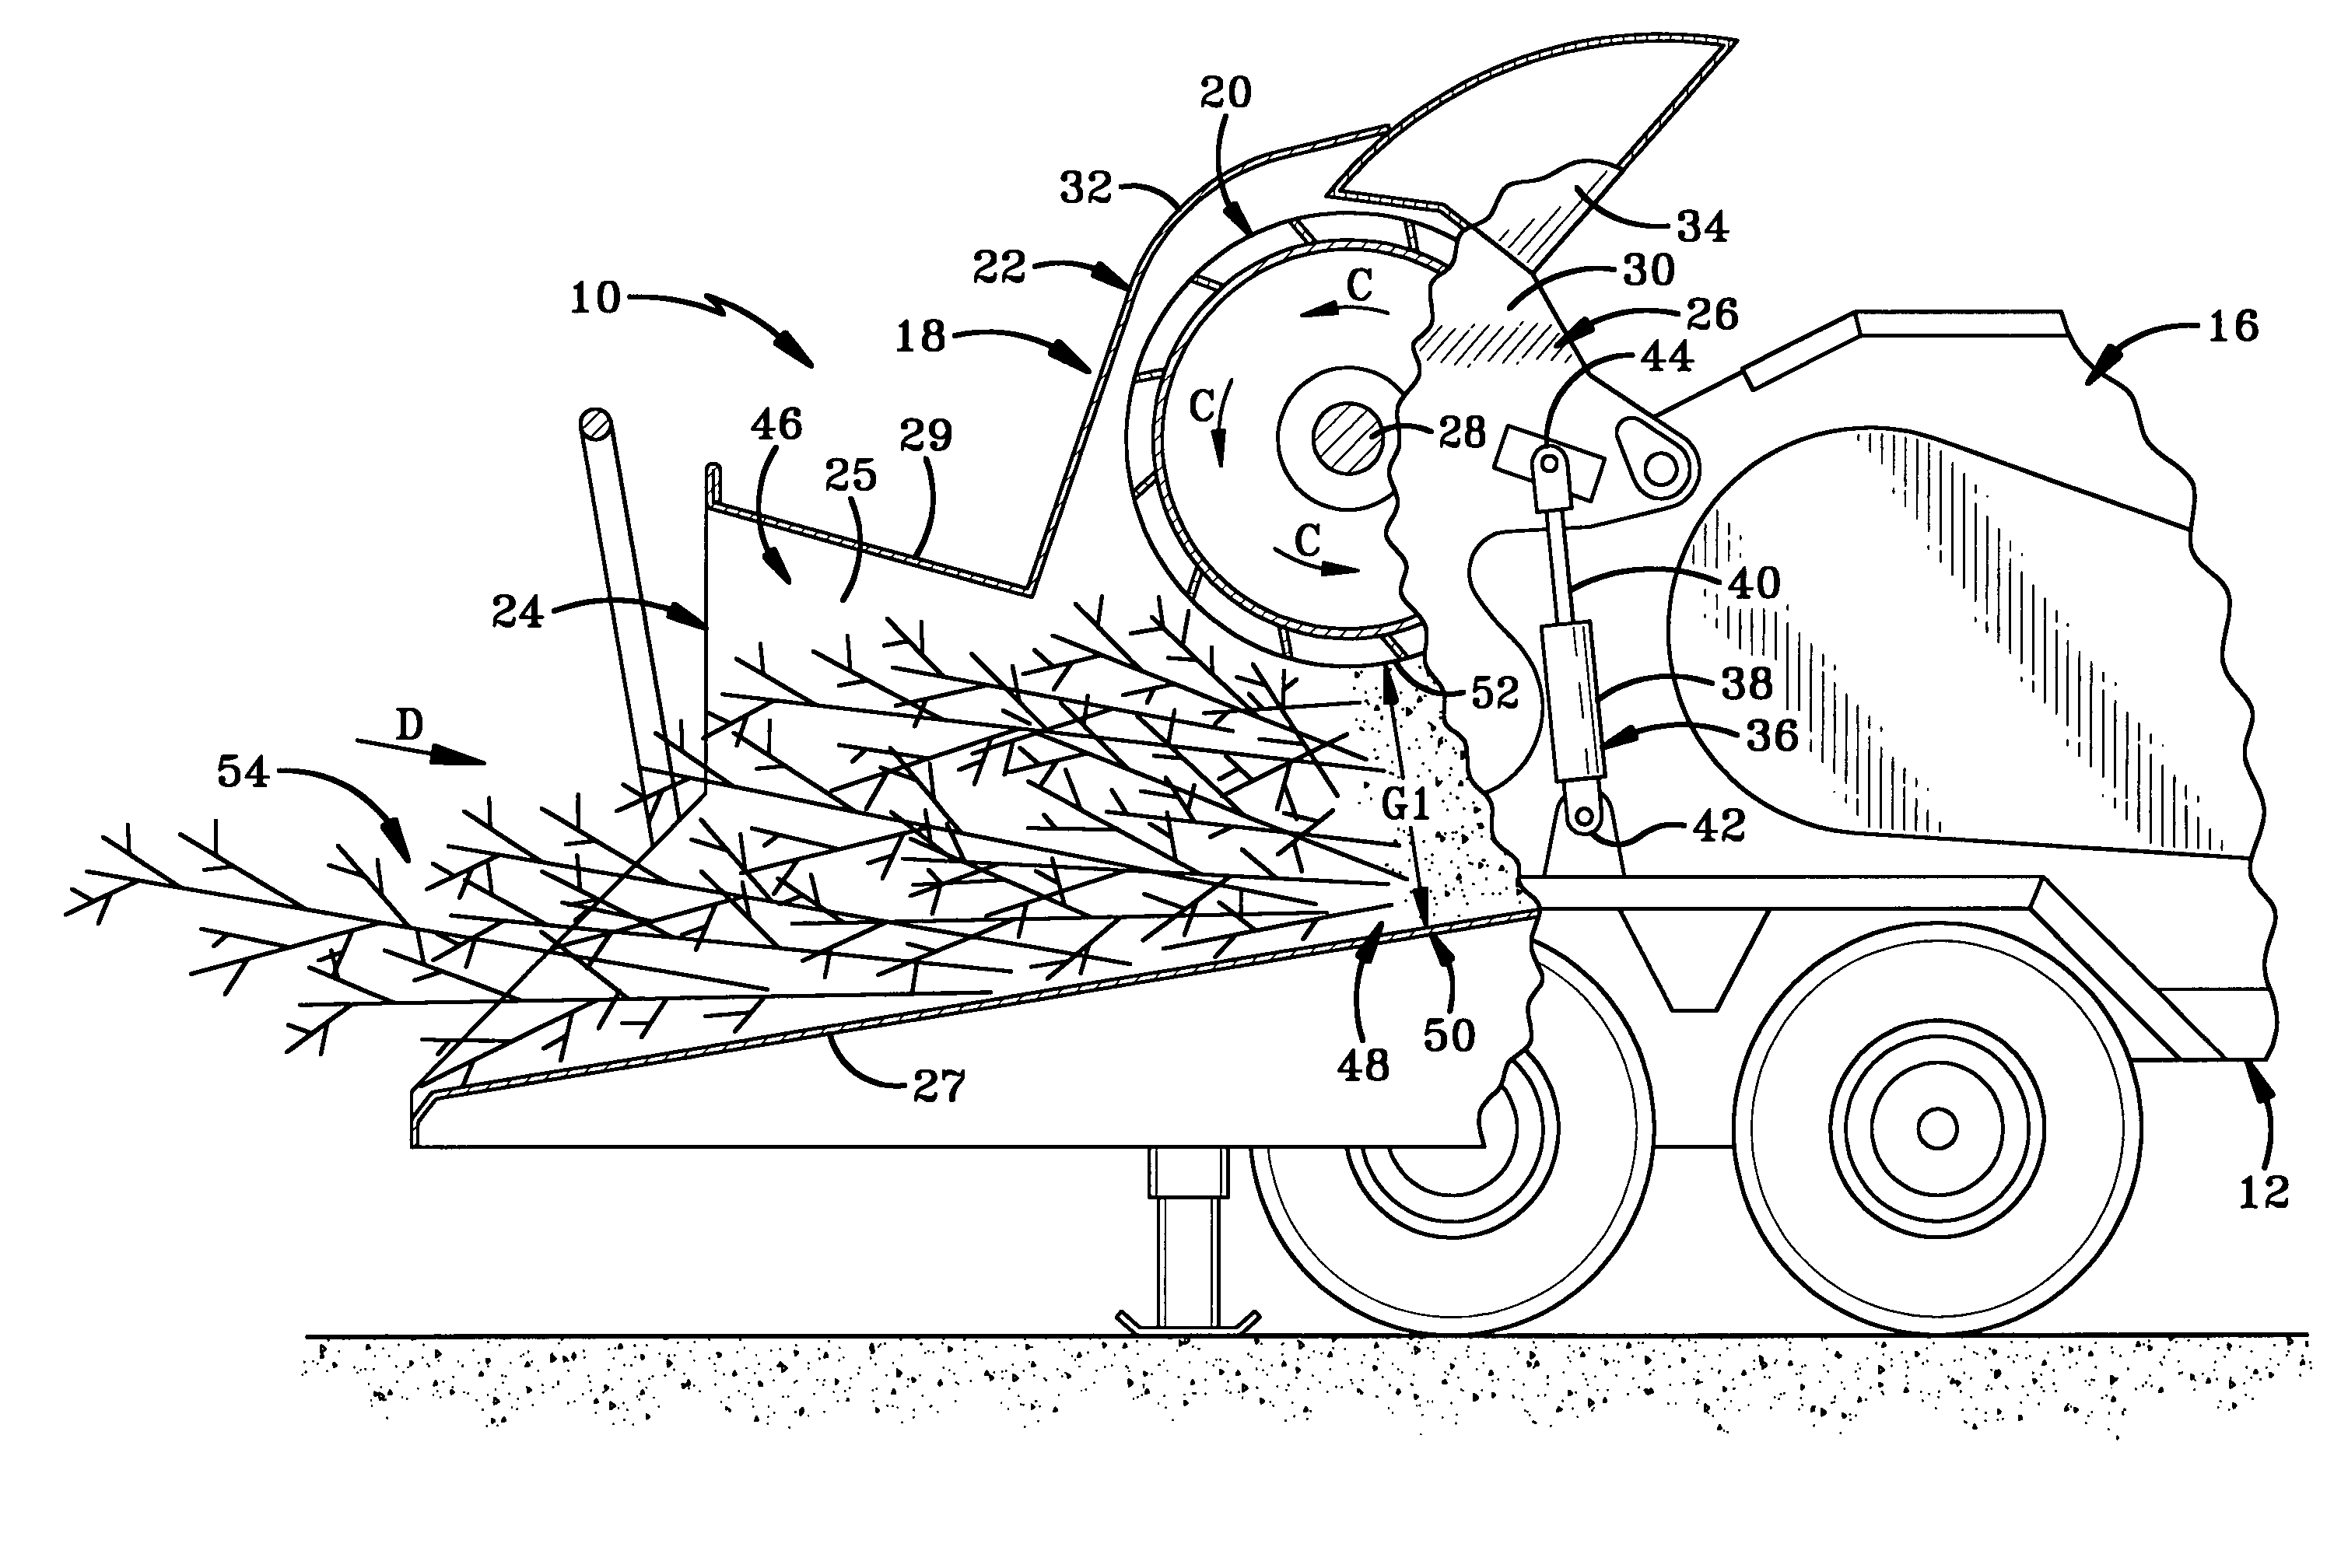 Chipper feed mechanism with pulsating down pressure